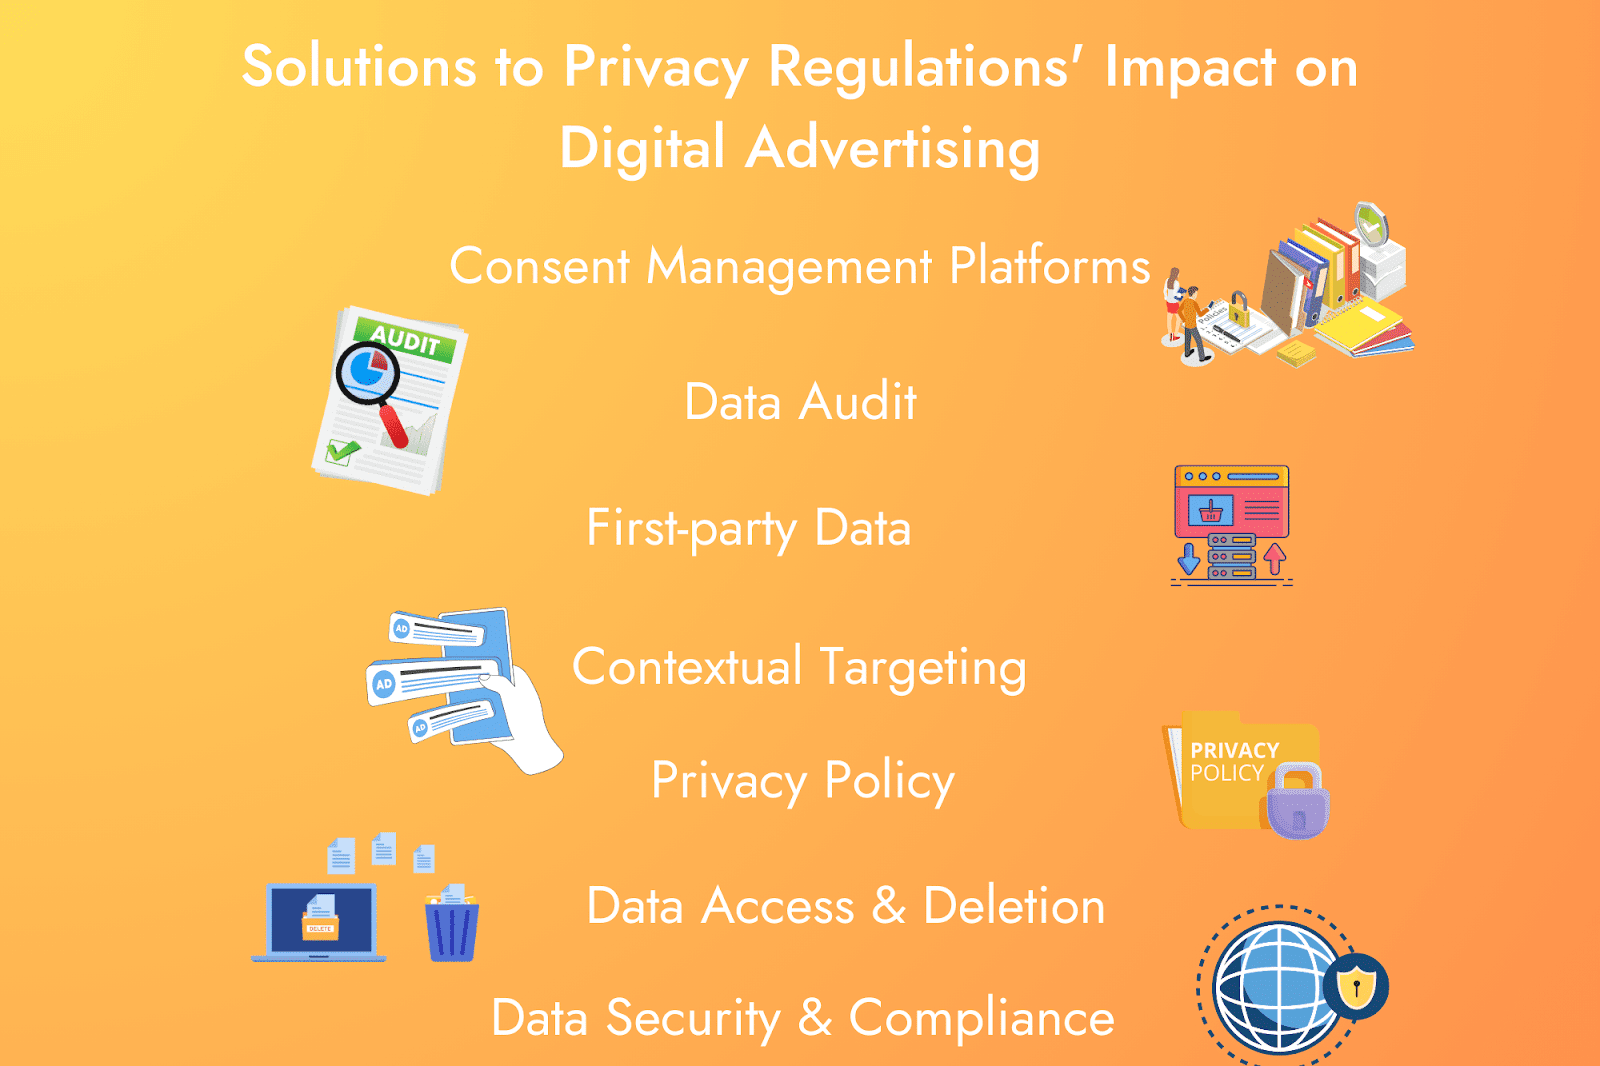 Solutions to Privacy Regulations' Impact on Digital Advertising